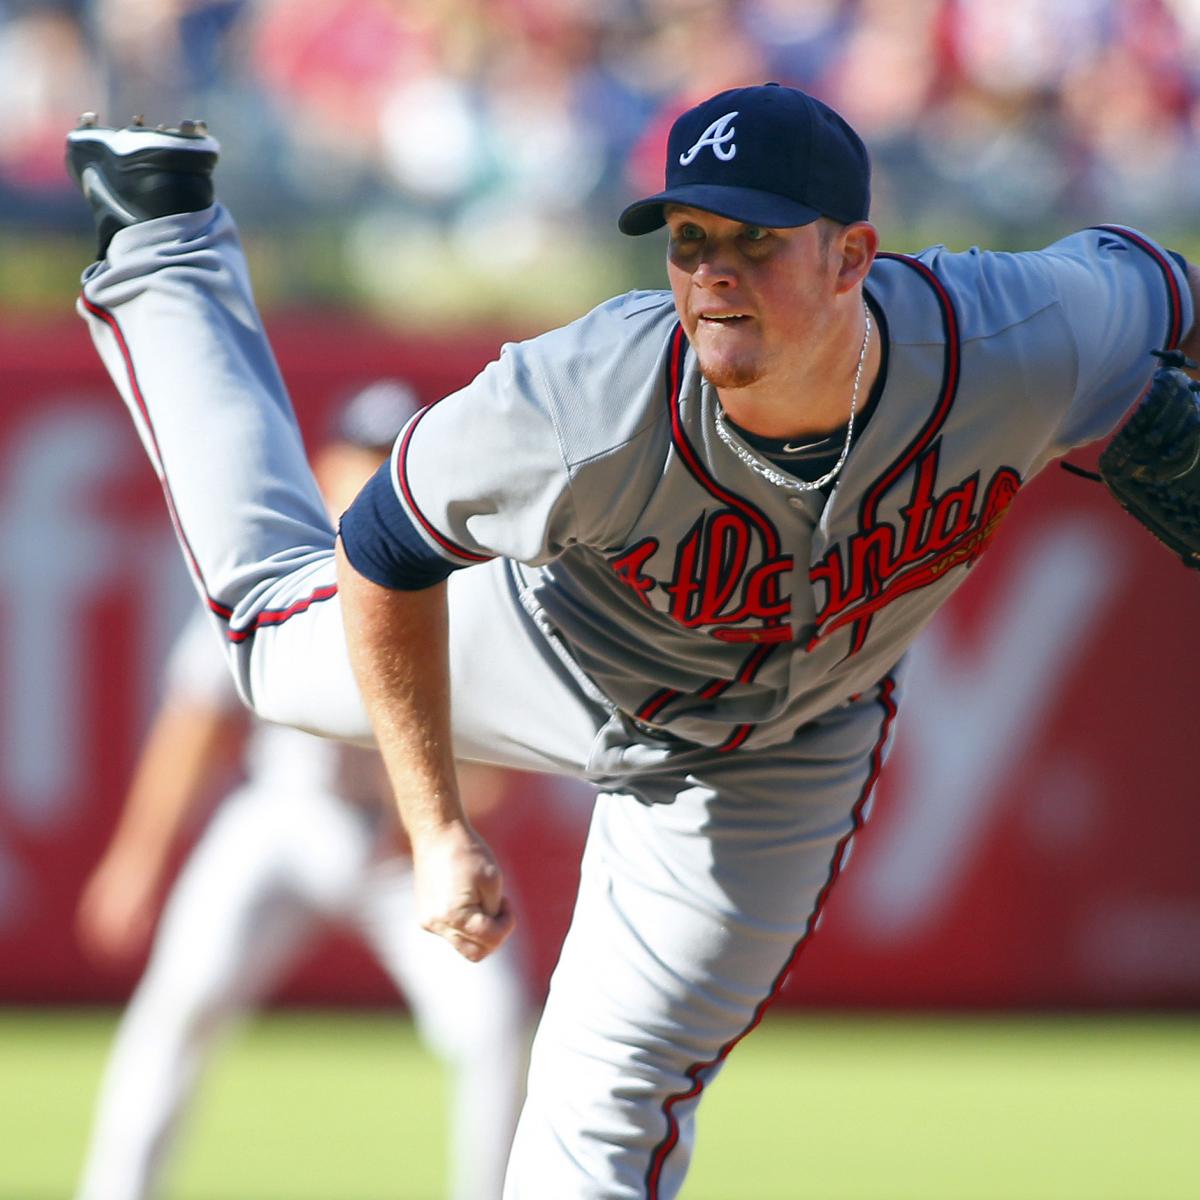 Kimbrel balancing the personal and the professional